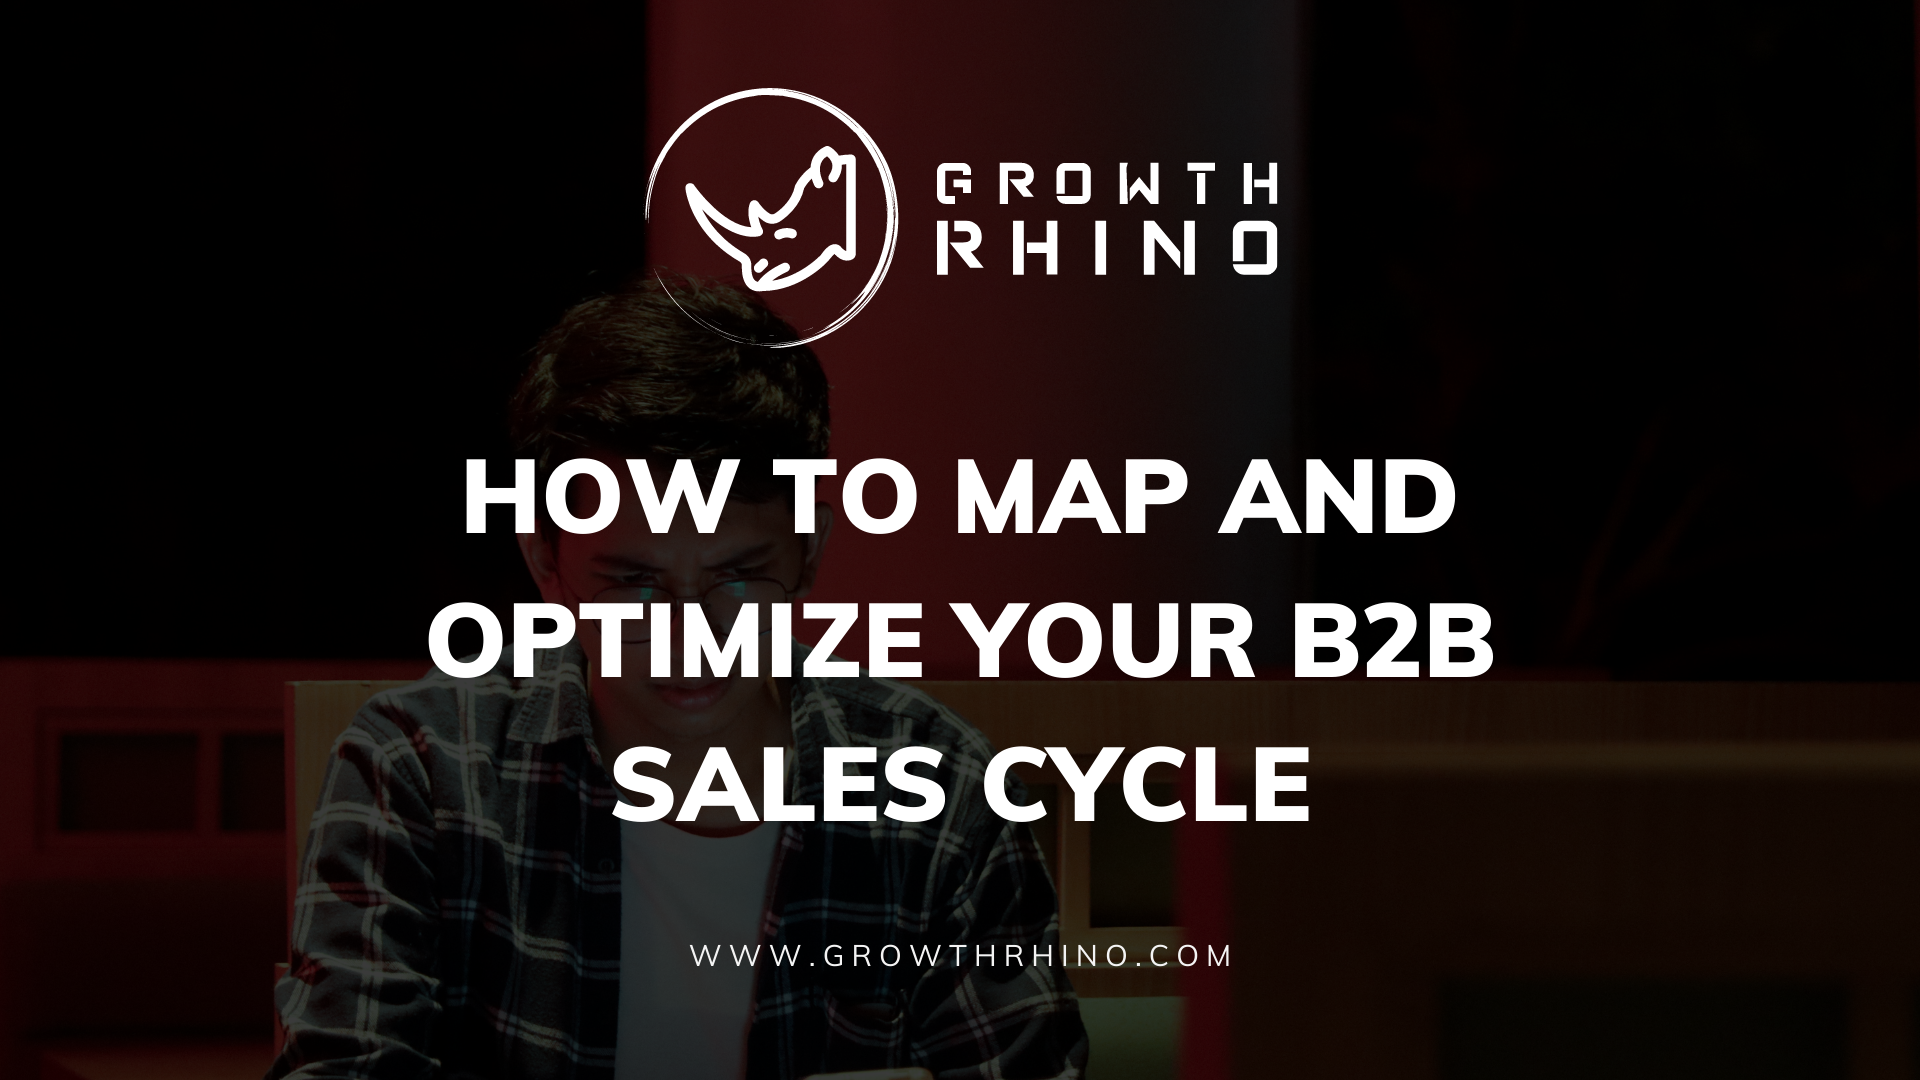 How to Map and Optimize Your B2B Sales Cycle for Increased Revenu